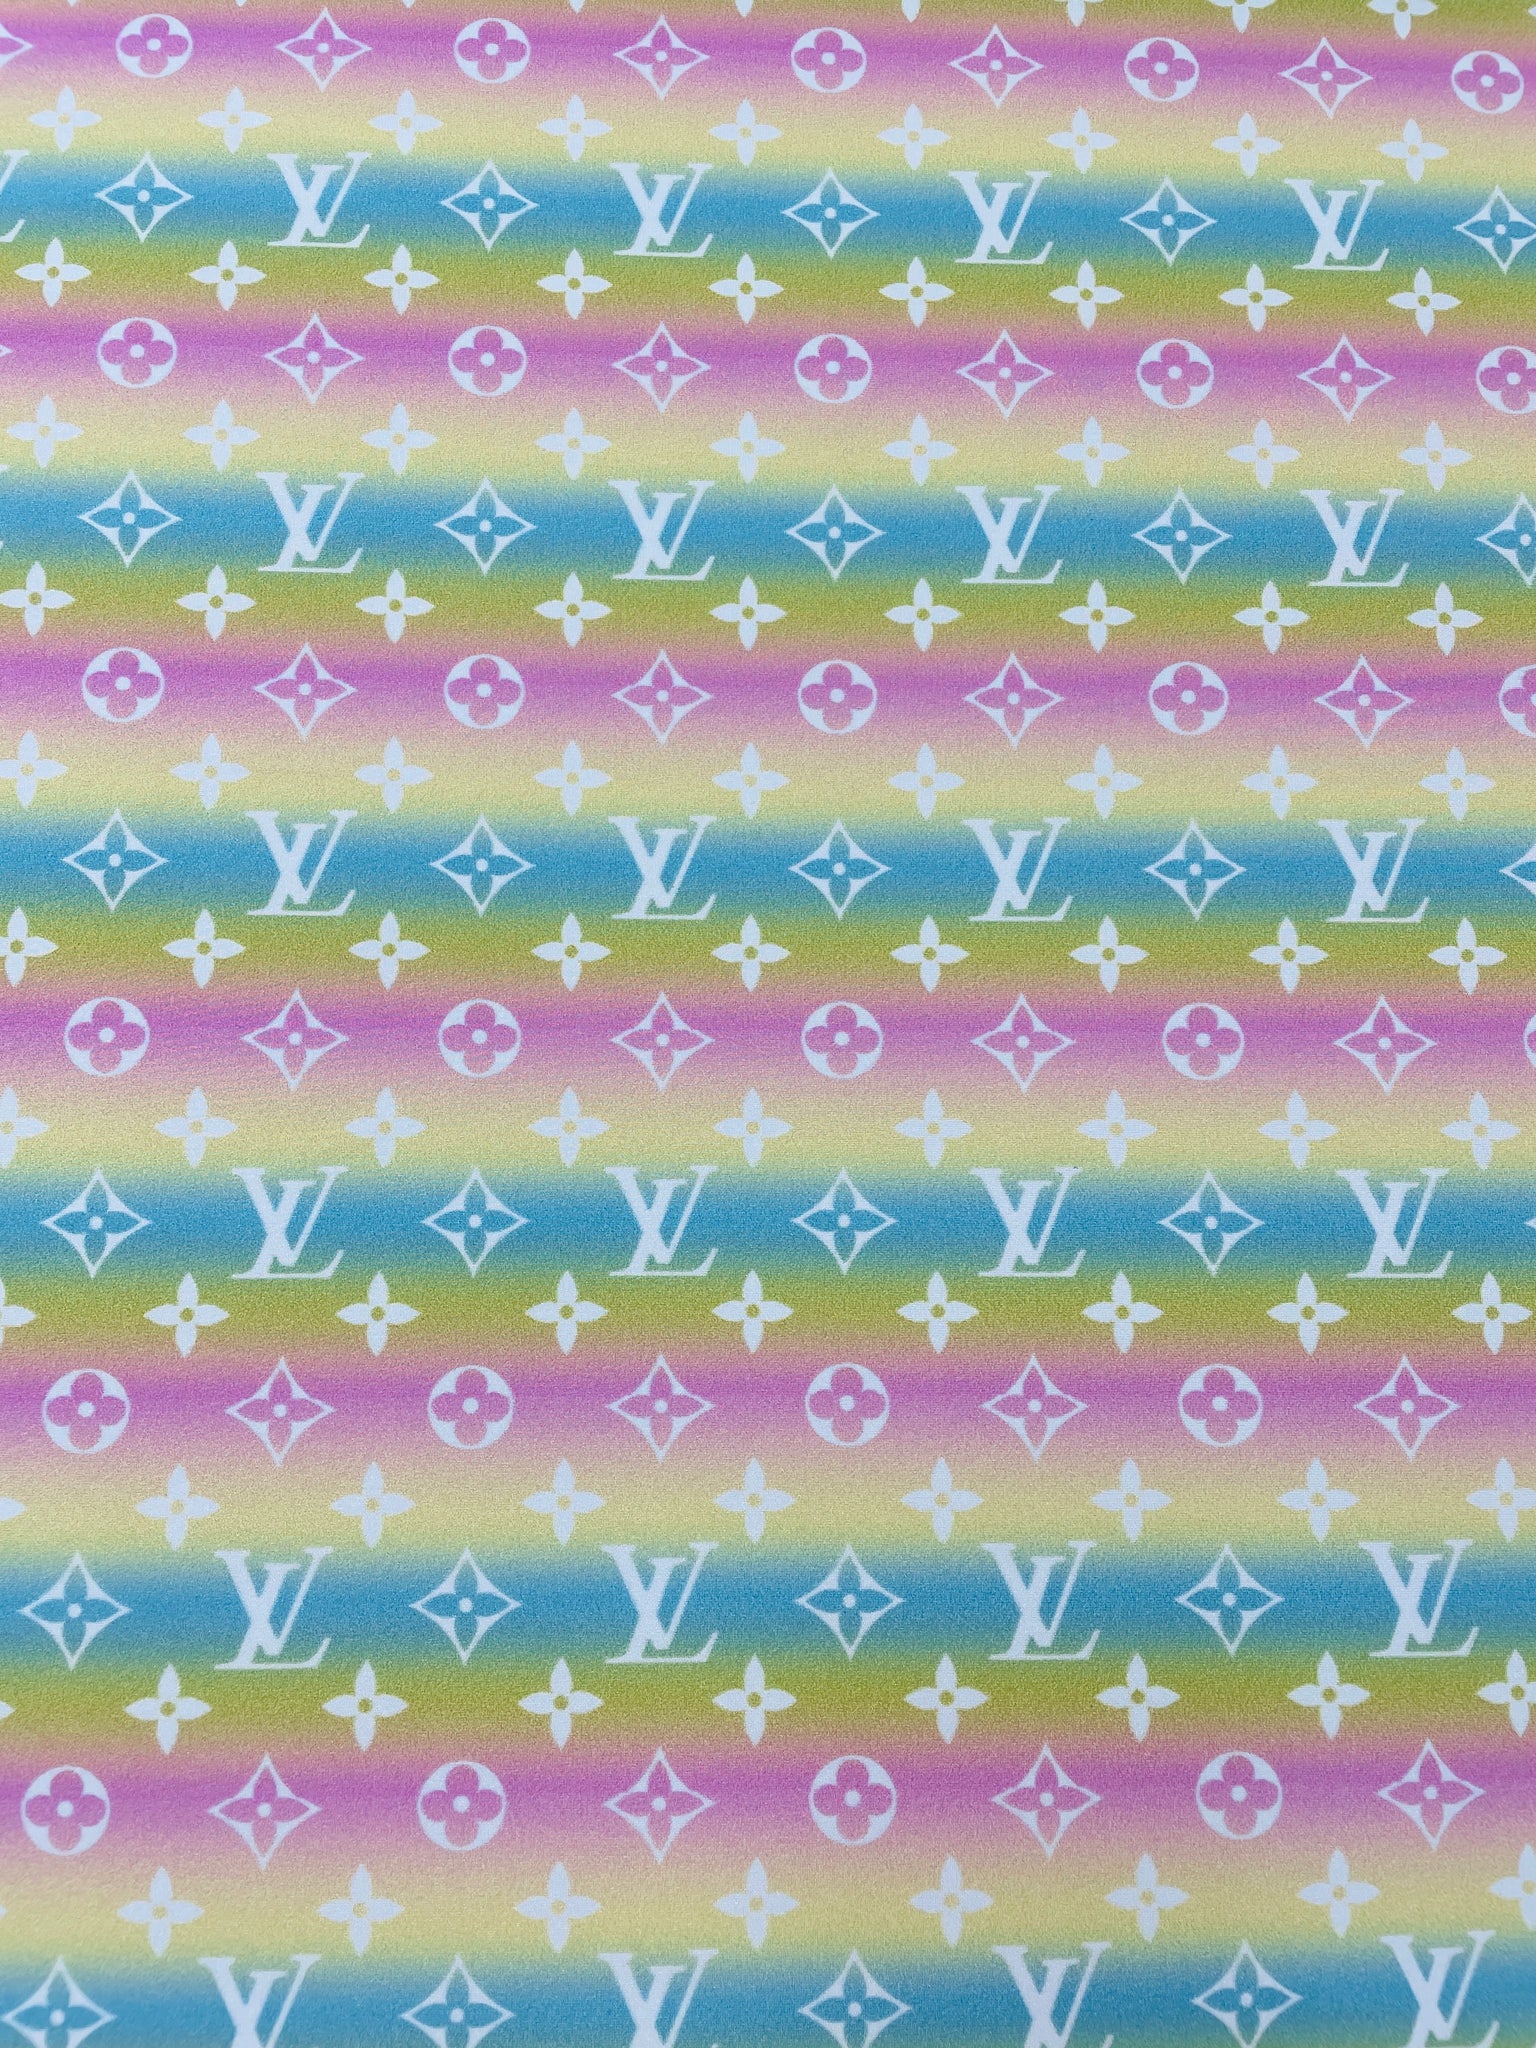 Louis v drips  Iphone background wallpaper, Louis vuitton iphone